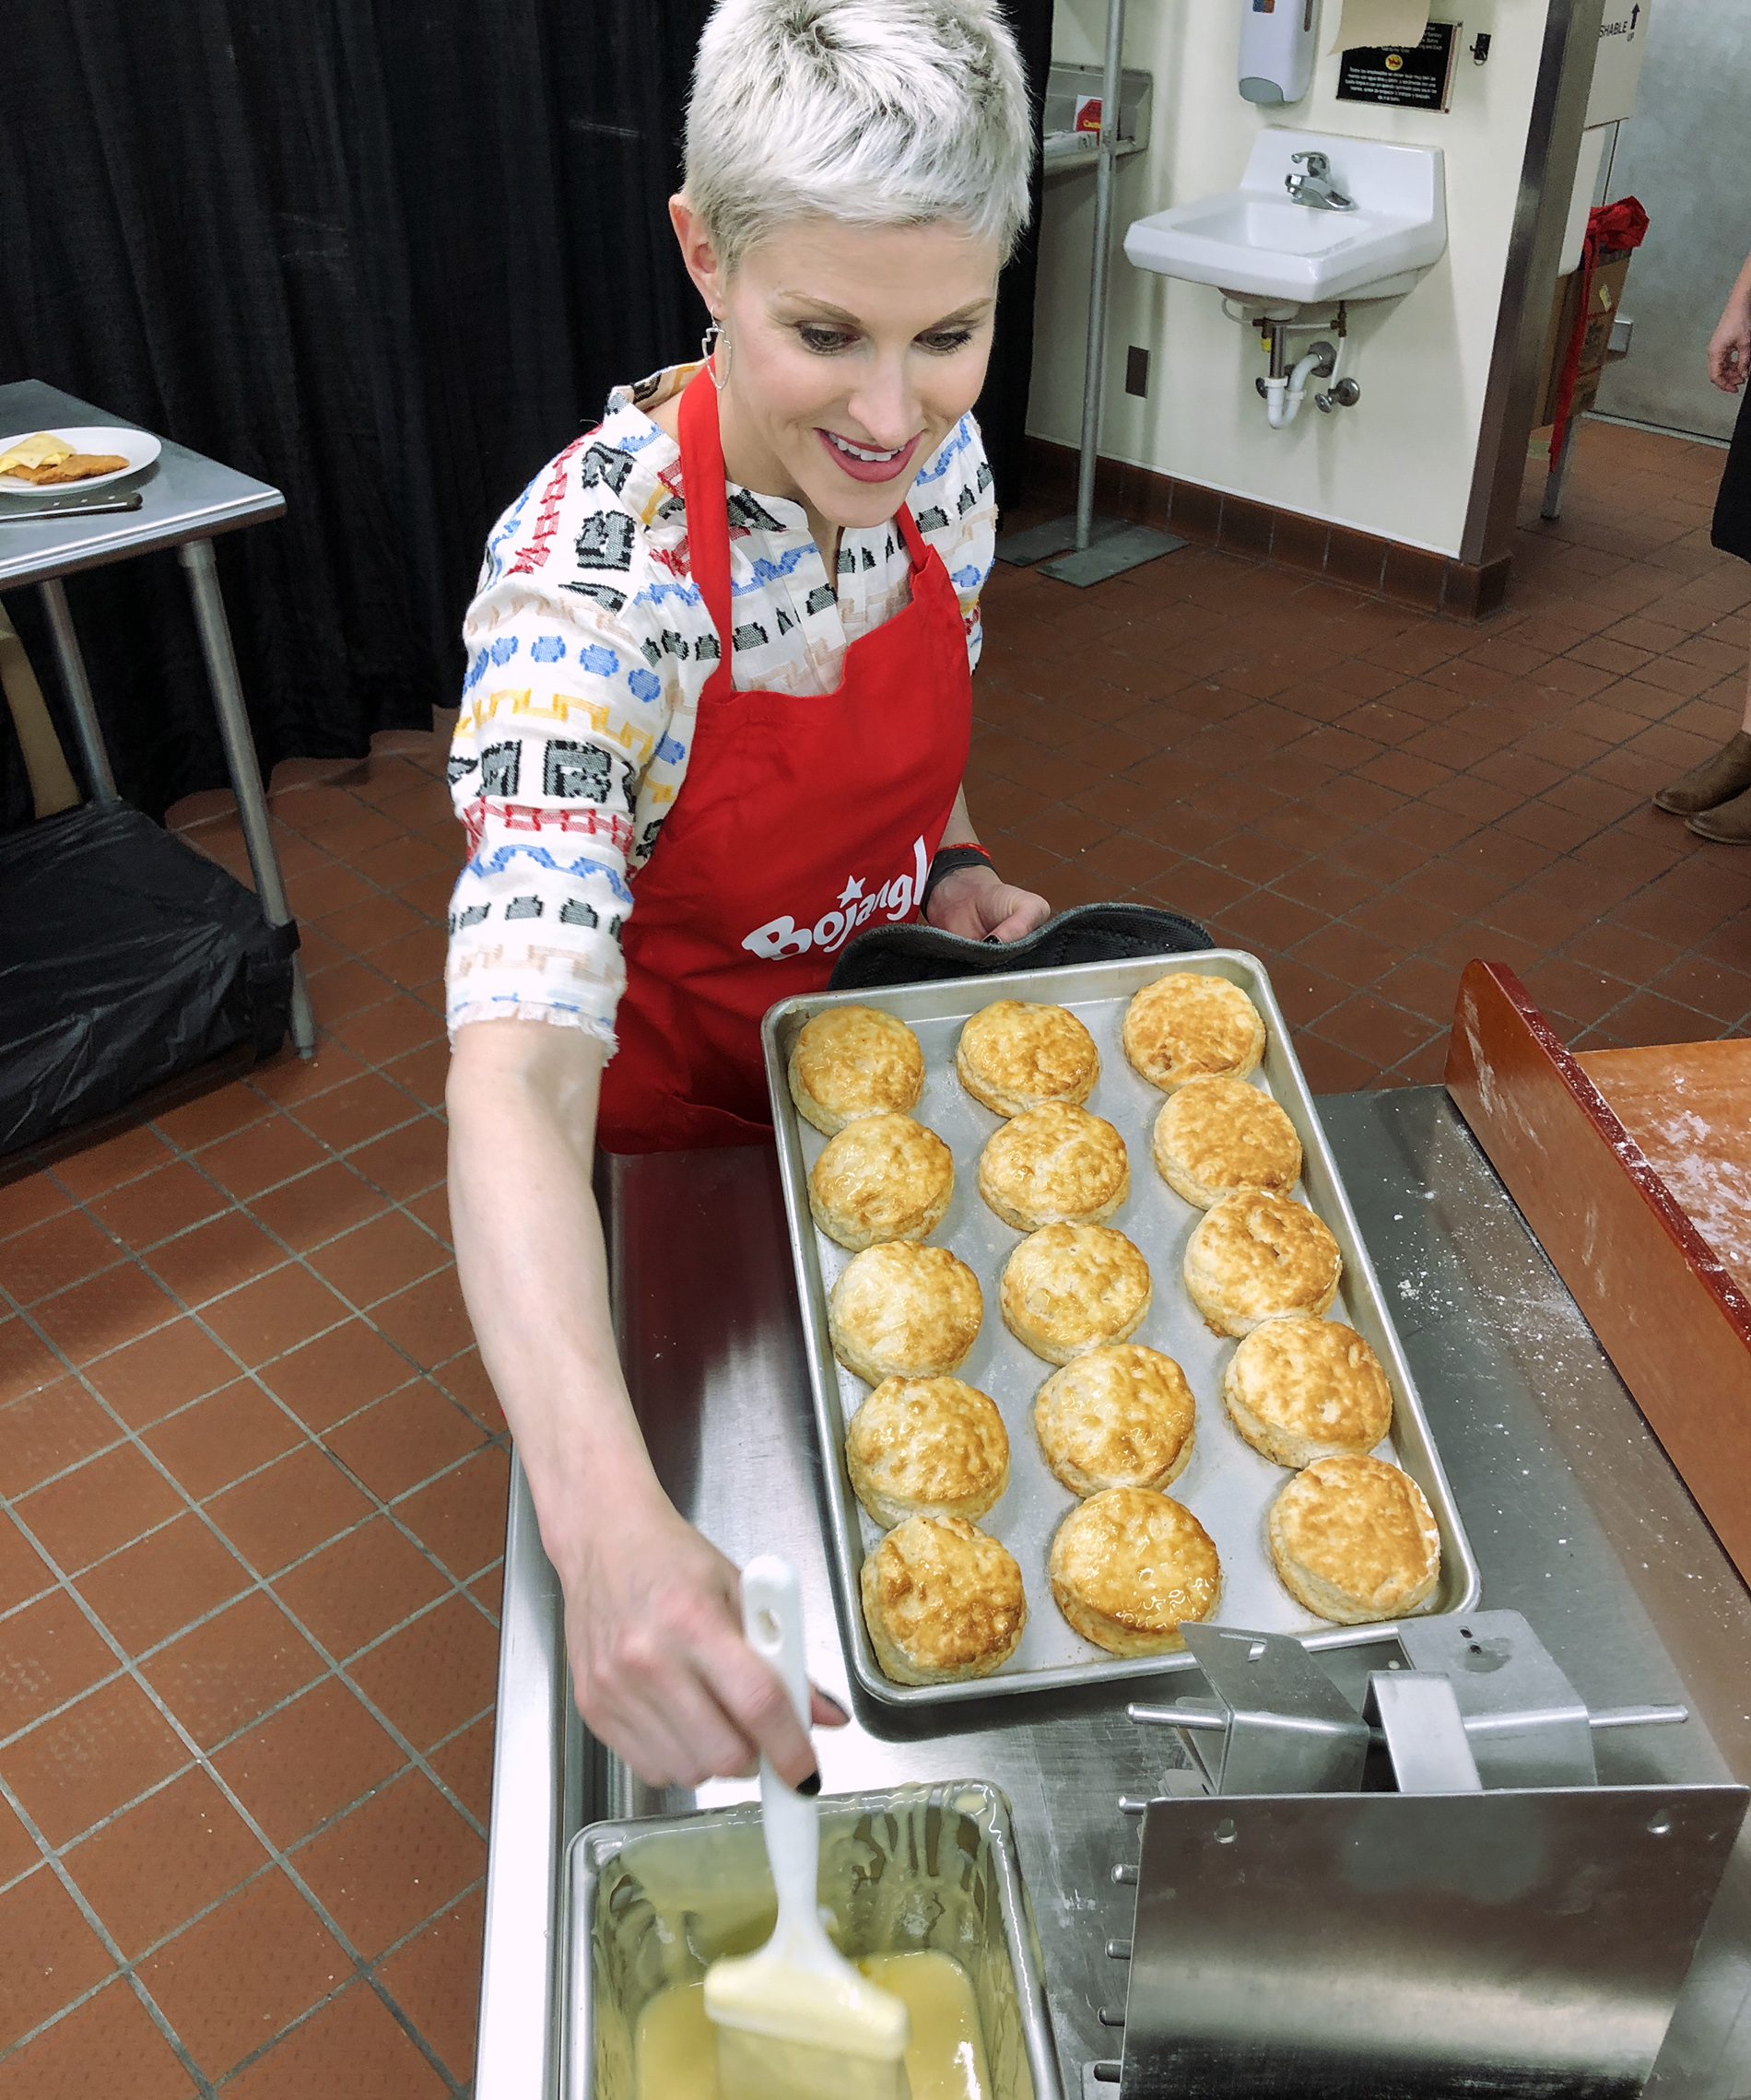 Behind the biscuit: Q&A with a Master Biscuit Maker at Bojangles